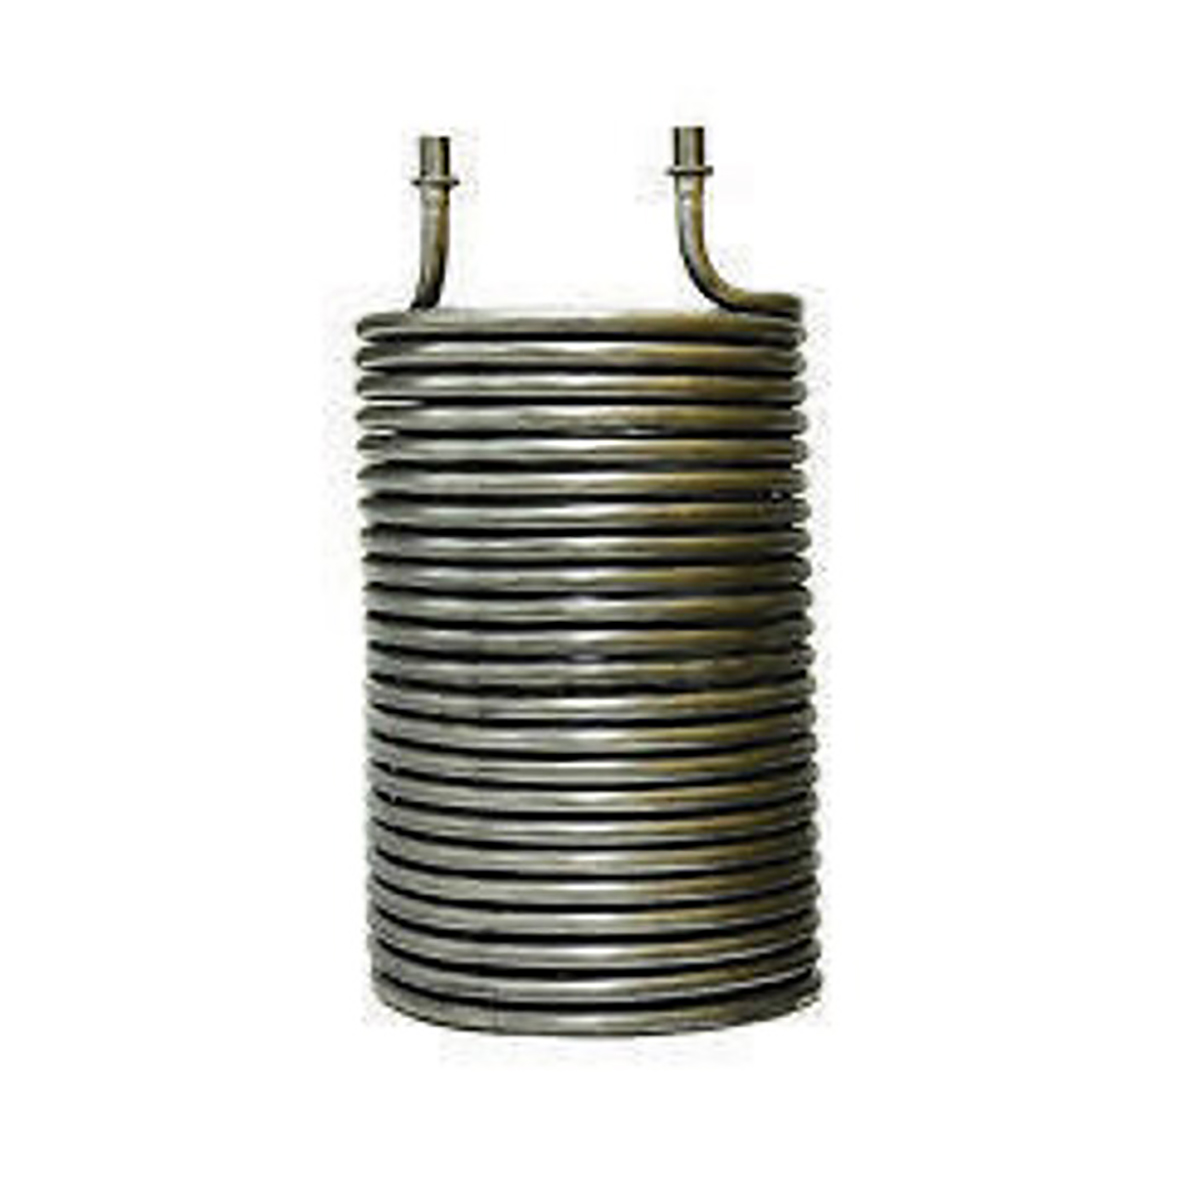 LAFN47175  HotWash Heating Coil Stainless Steel